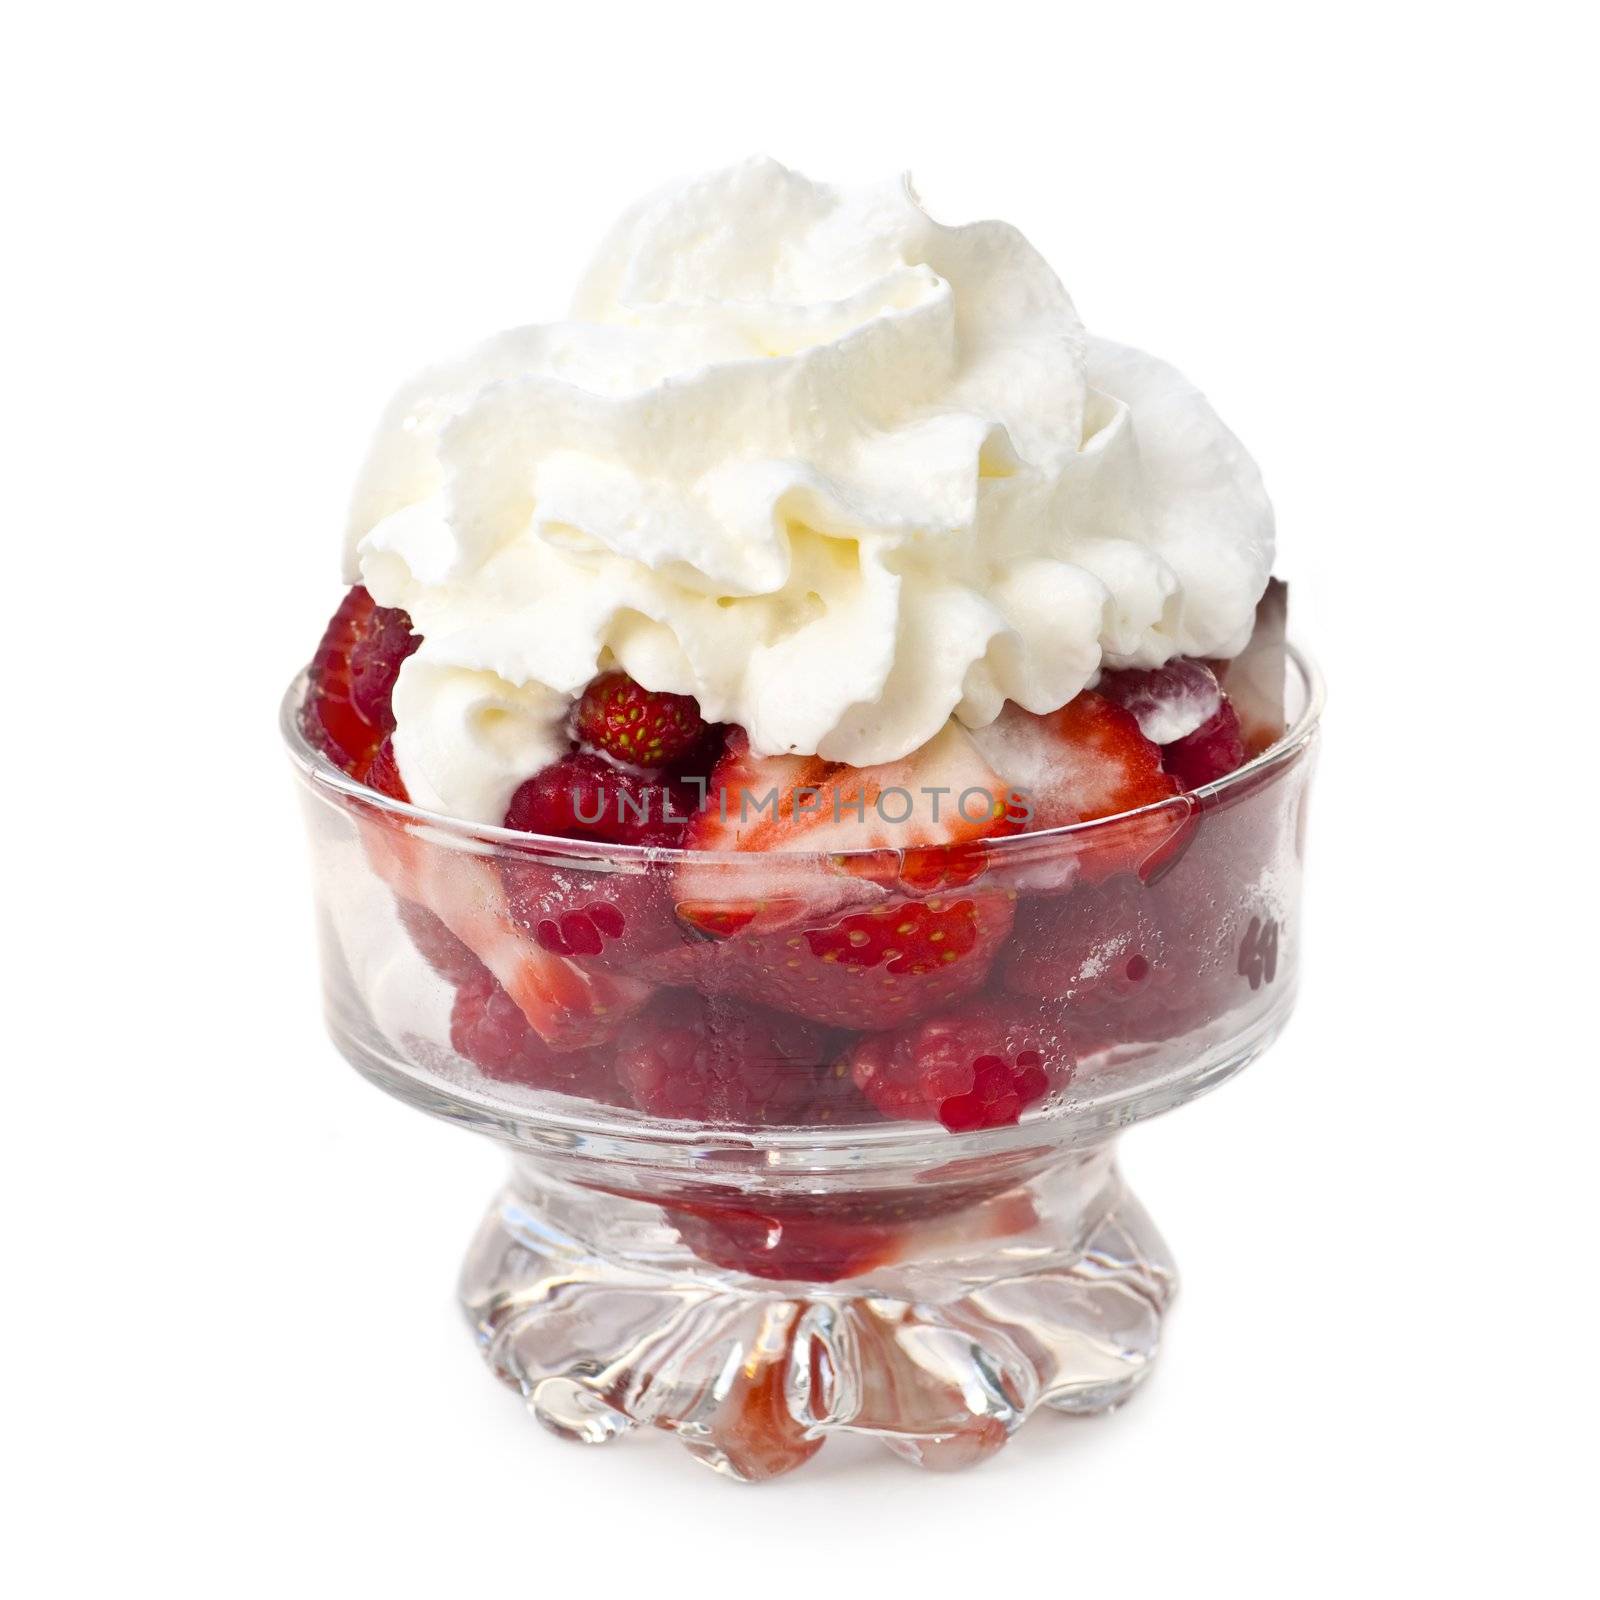 Fresh raspberries and strawberries with whipped cream in glass bowl isolated on white